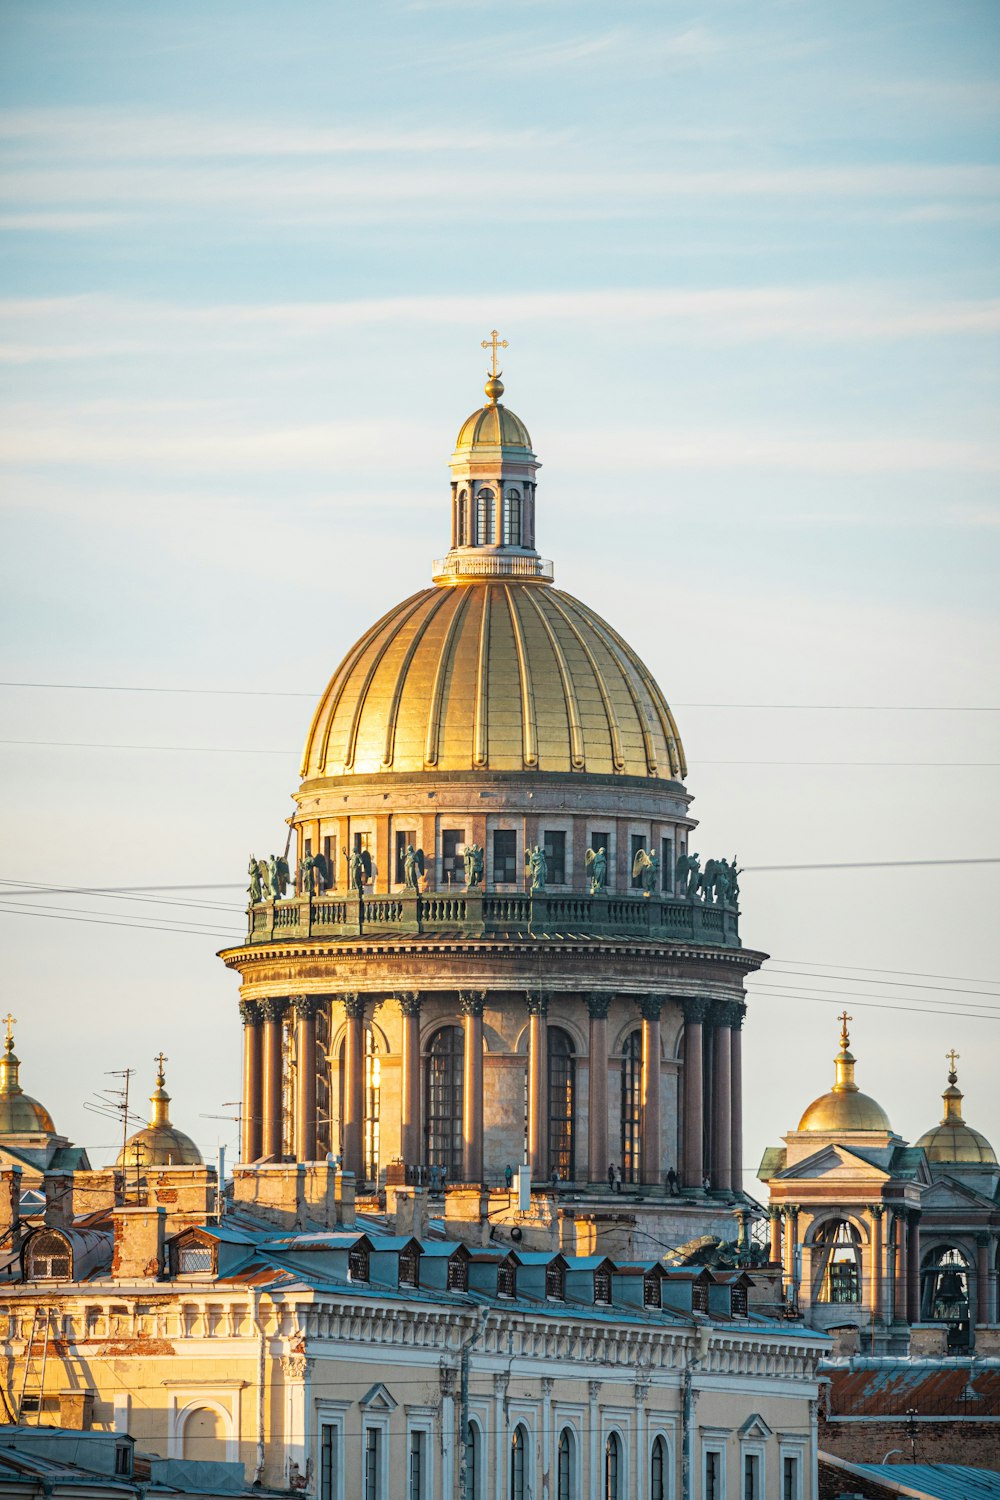 a large building with a gold domed roof with St. Peter's Basilica in the background